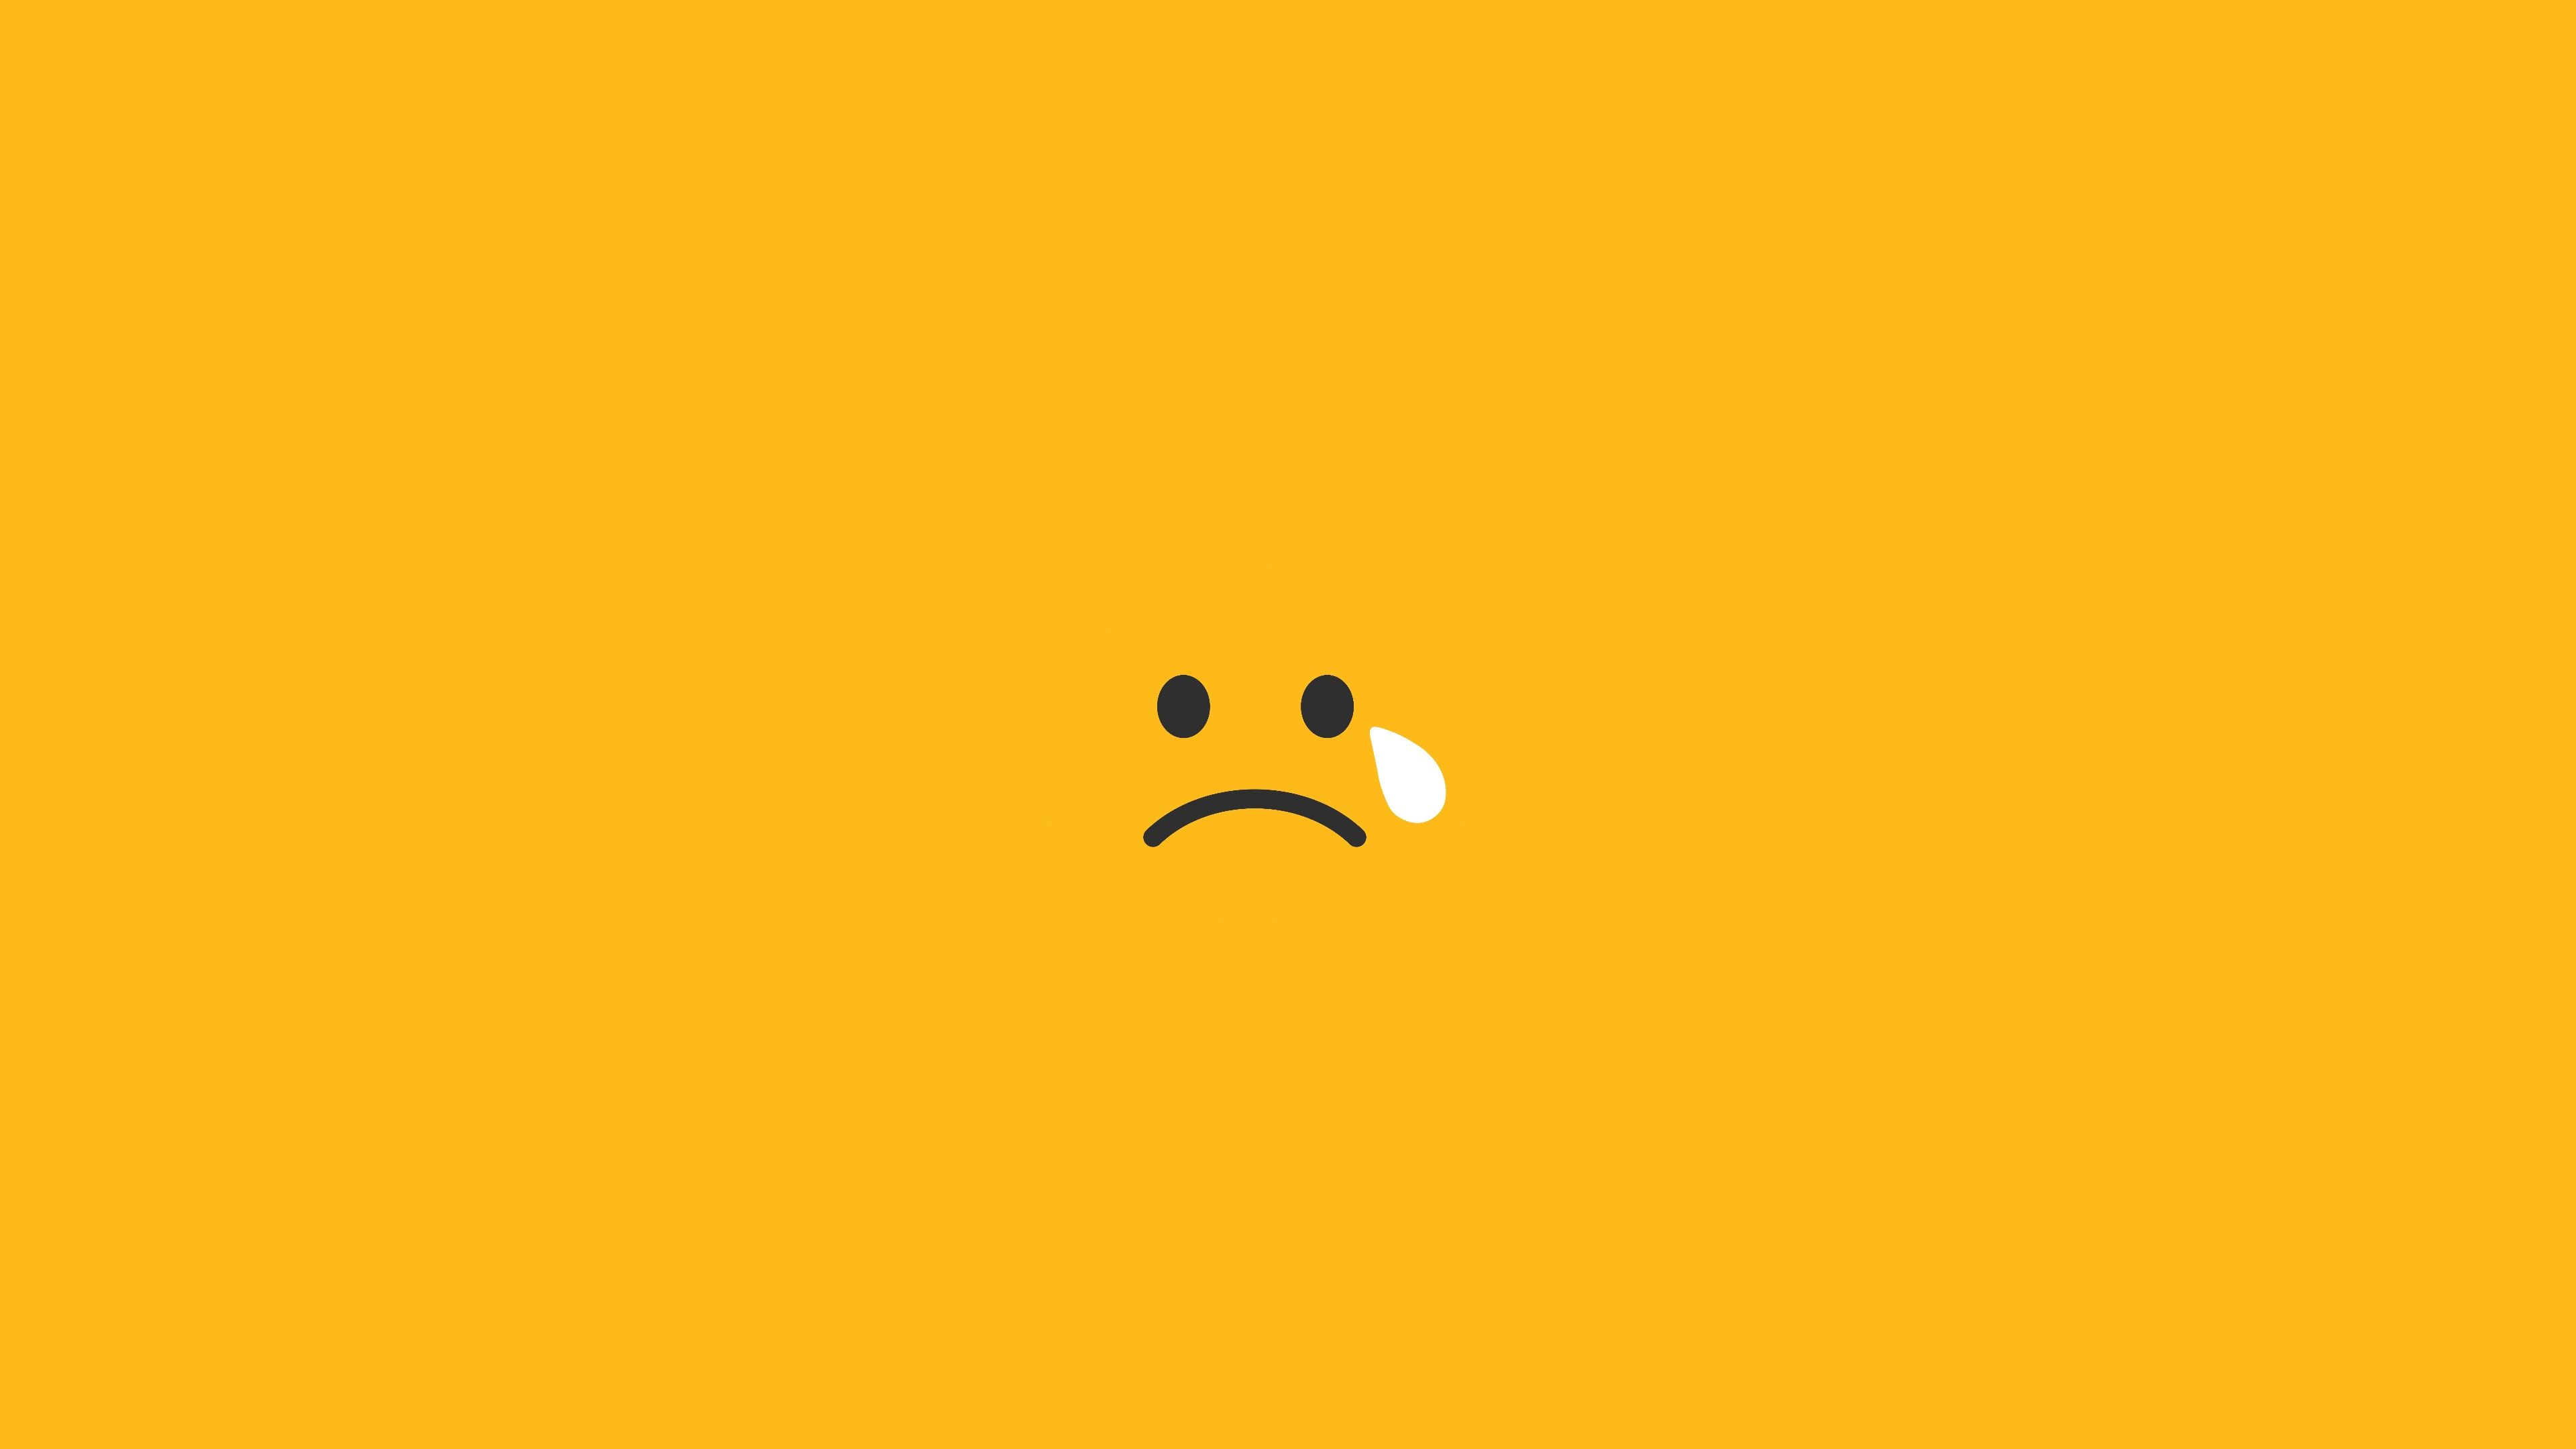 Sad Tears Smiley Minimalism 4k, HD Artist, 4k Wallpapers, Image, Backgrounds, Photos and Pictures